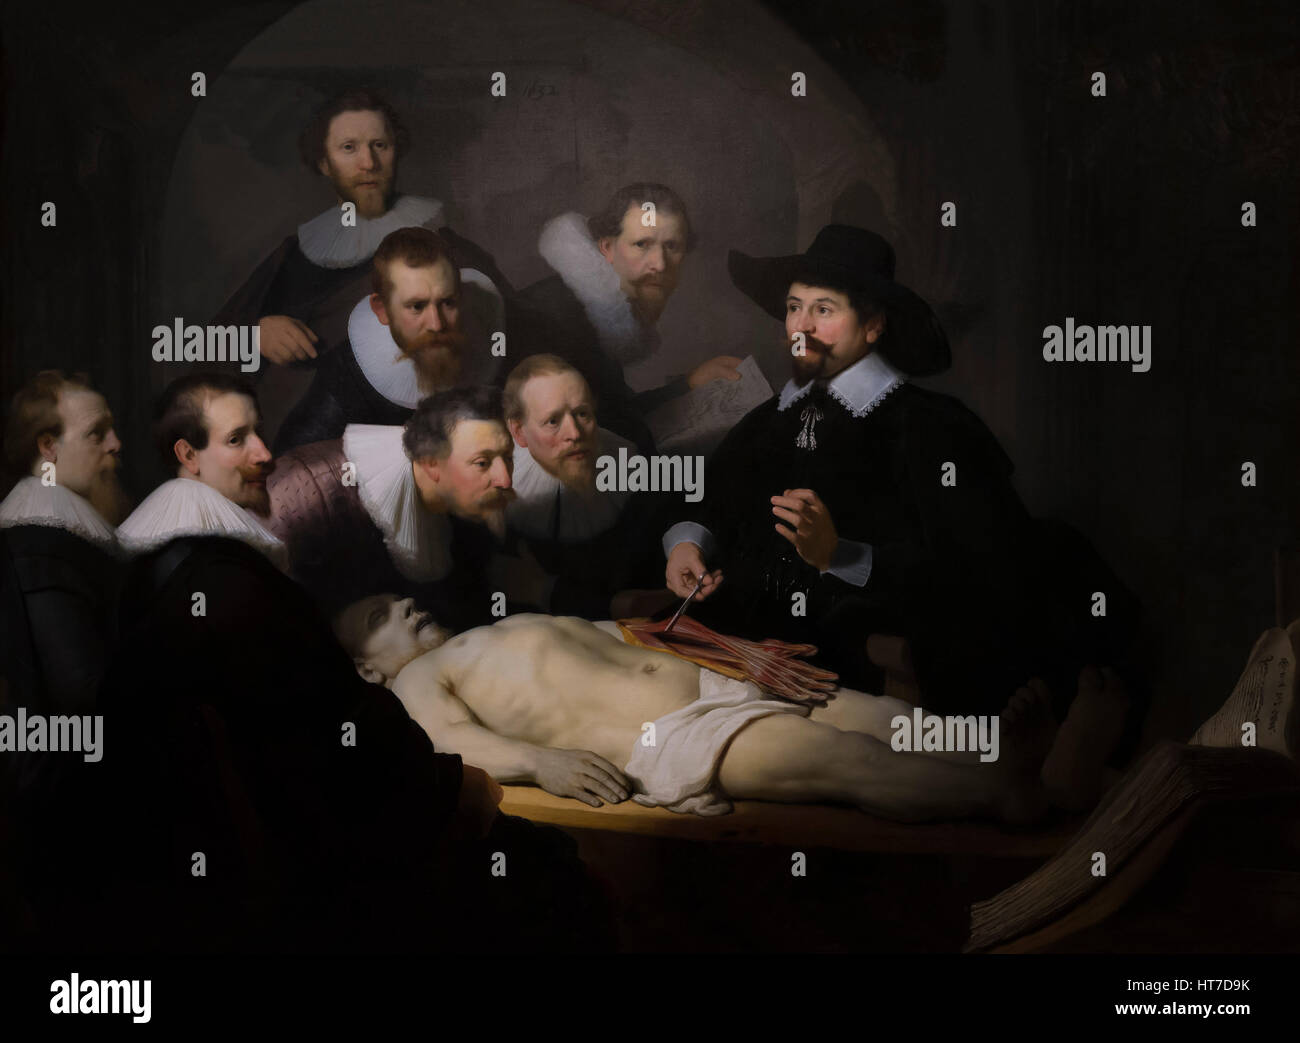 The Anatomy Lesson of Dr Nicholas Tulp, by Rembrandt, 1632, Royal Art Gallery, Mauritshuis Museum, The Hague, Netherlands, Europe Stock Photo